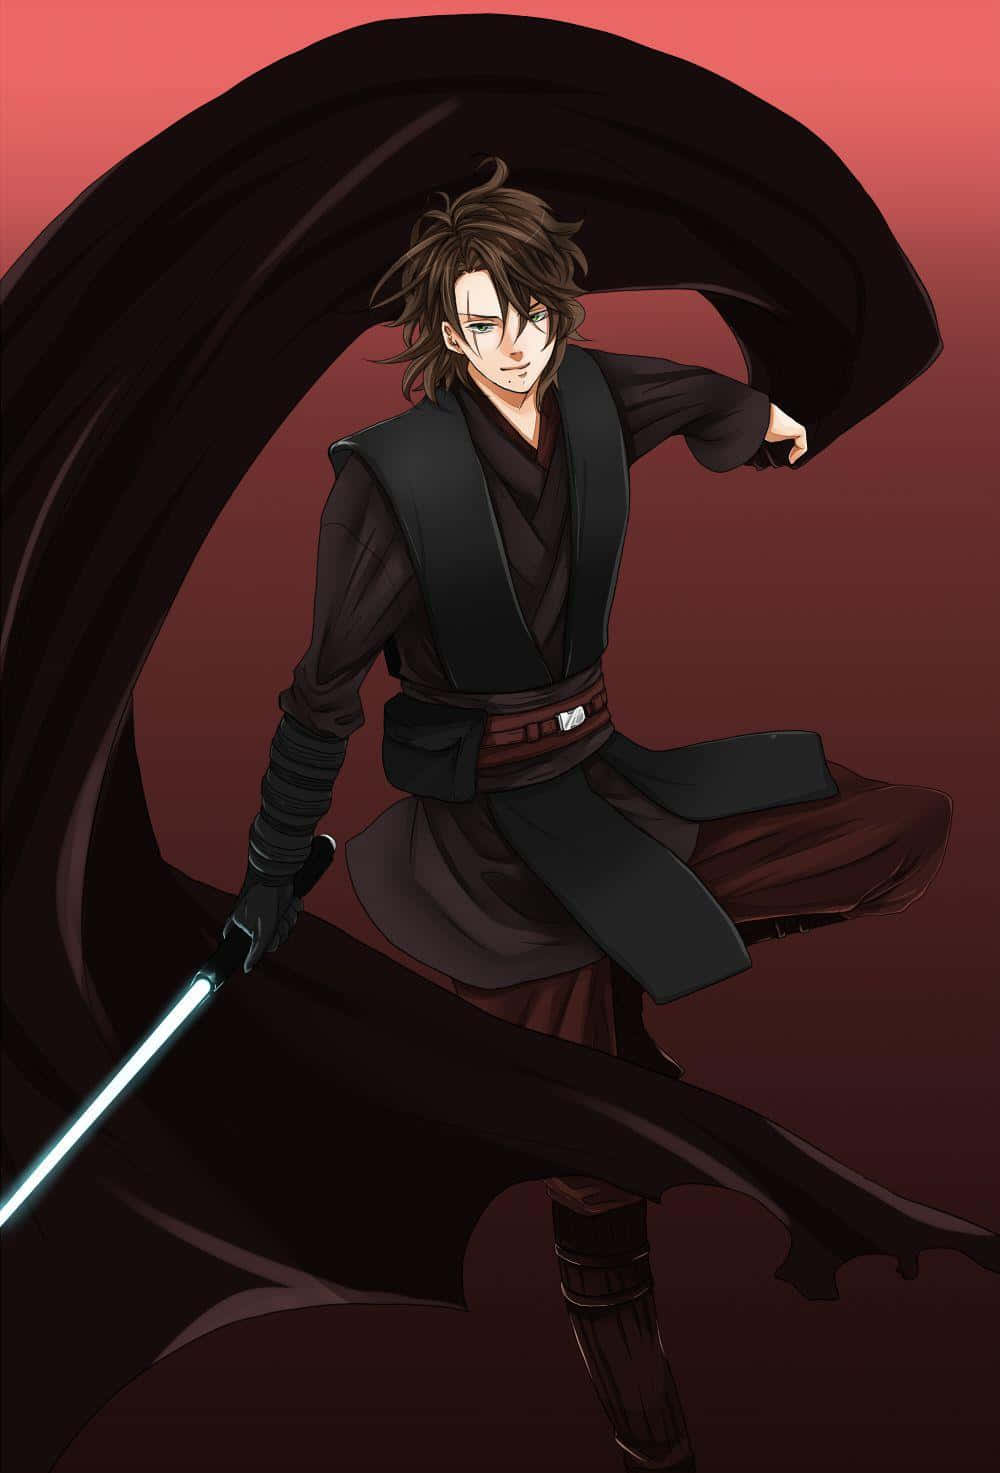 Animated Anakin Skywalkerwith Lightsaber Wallpaper